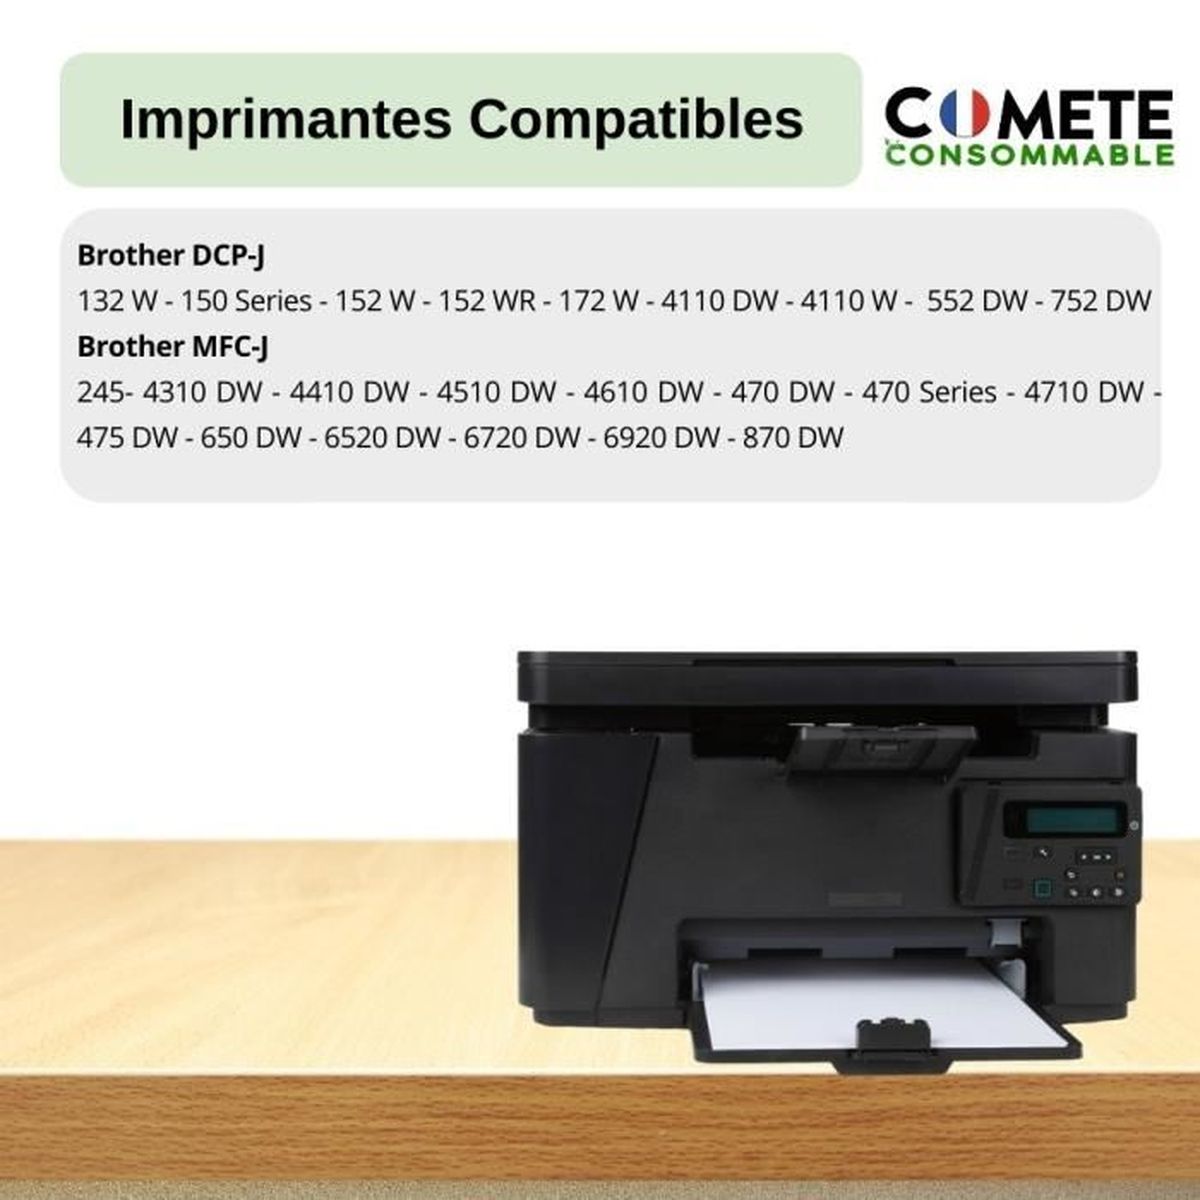 Cartouches Encre Imprimante BROTHER Mfc j - 5740 dwt